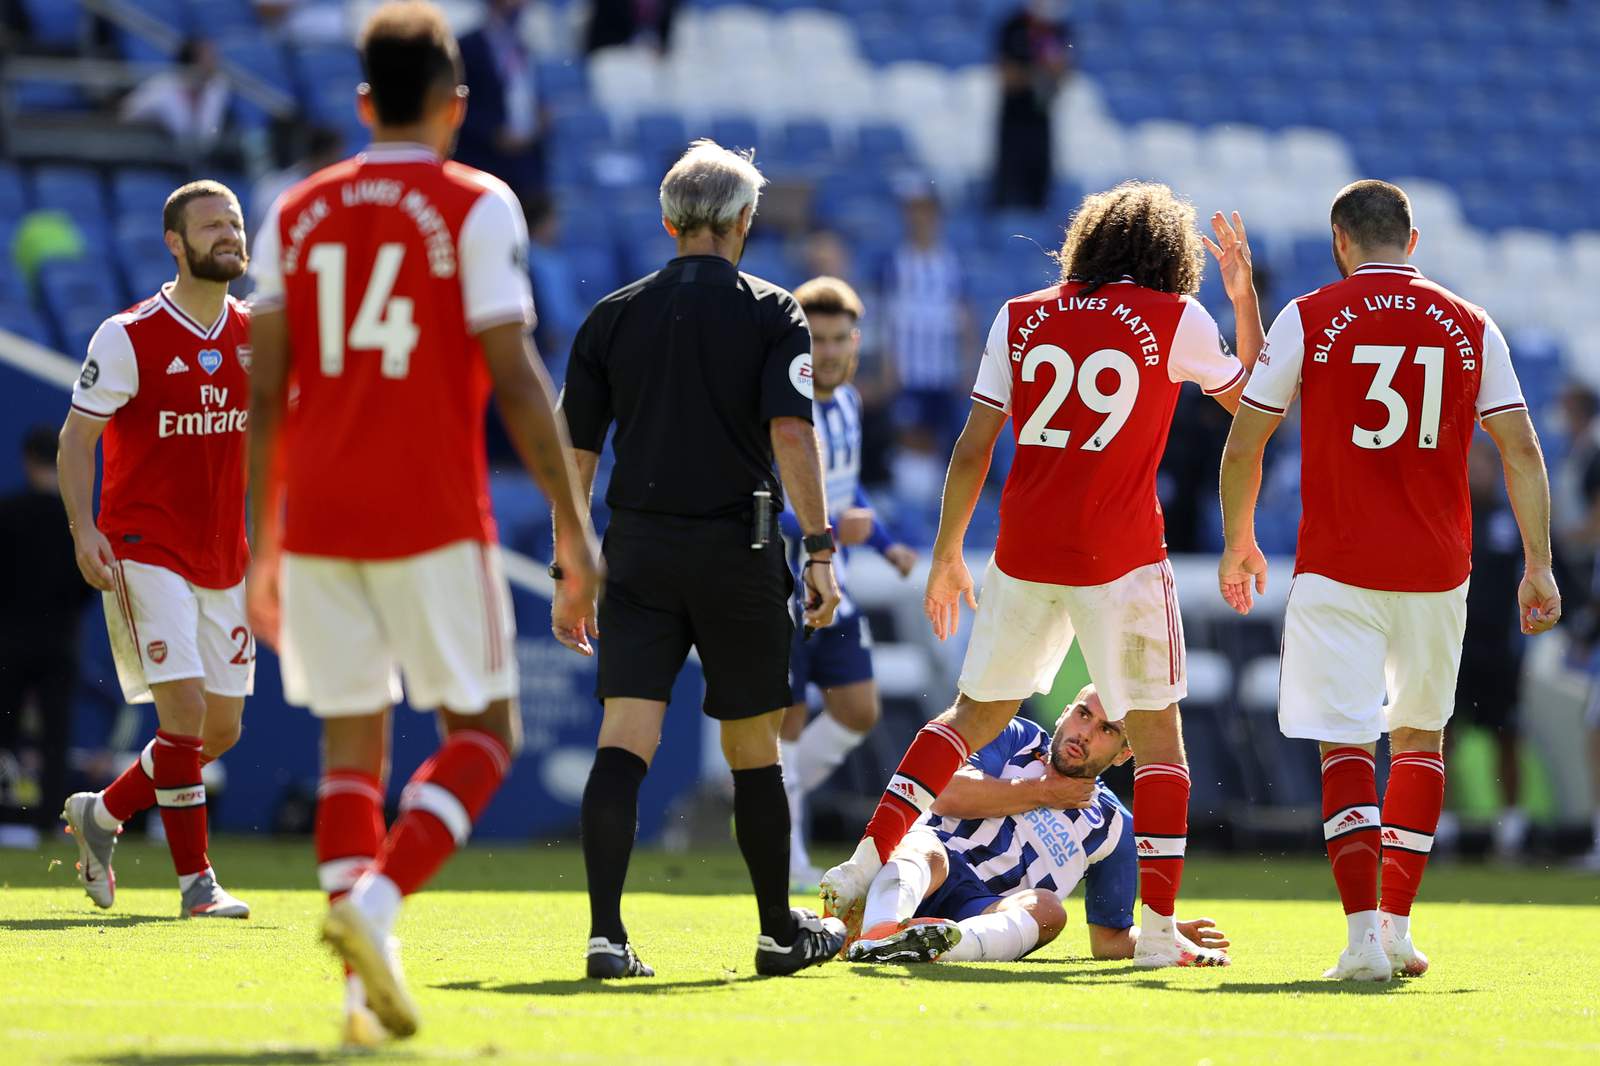 Another loss, another injury: Arsenal struggles on PL return